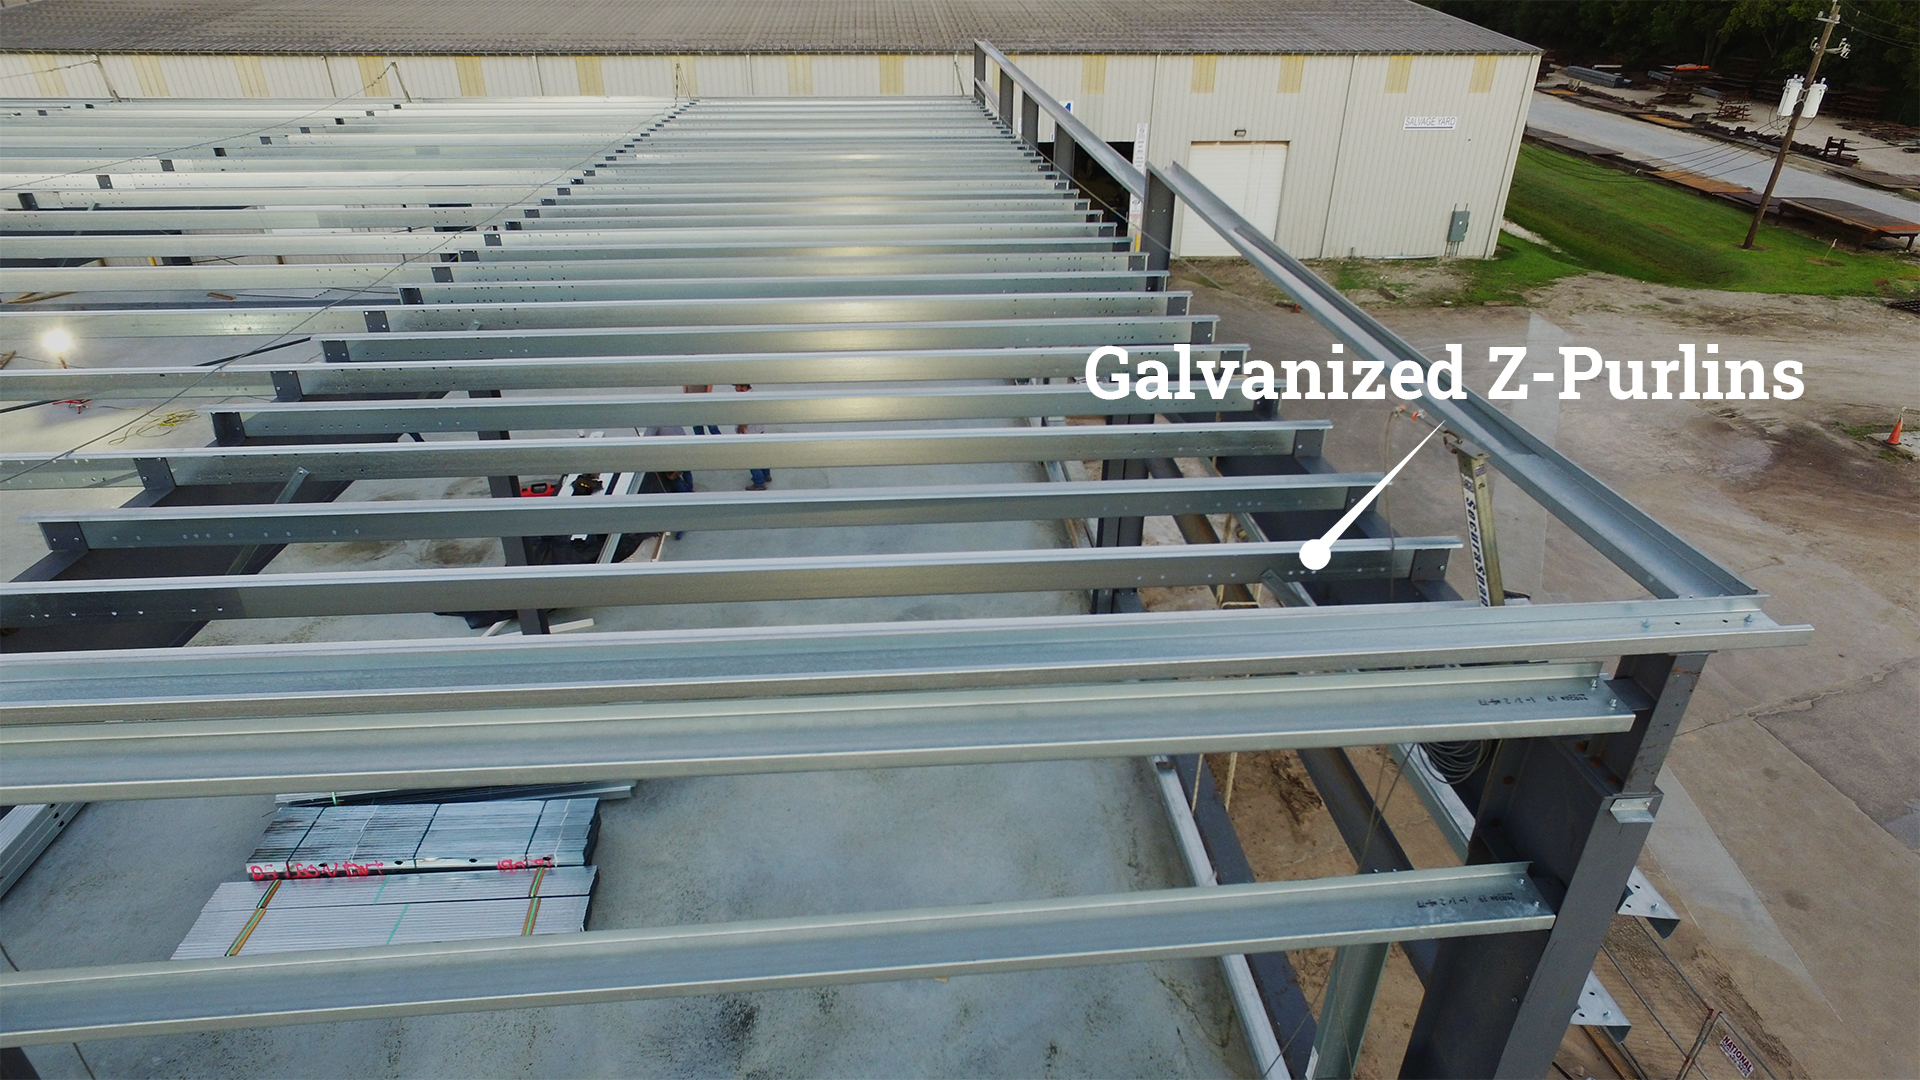 Galvanized Z Purlins used for roof desk support.